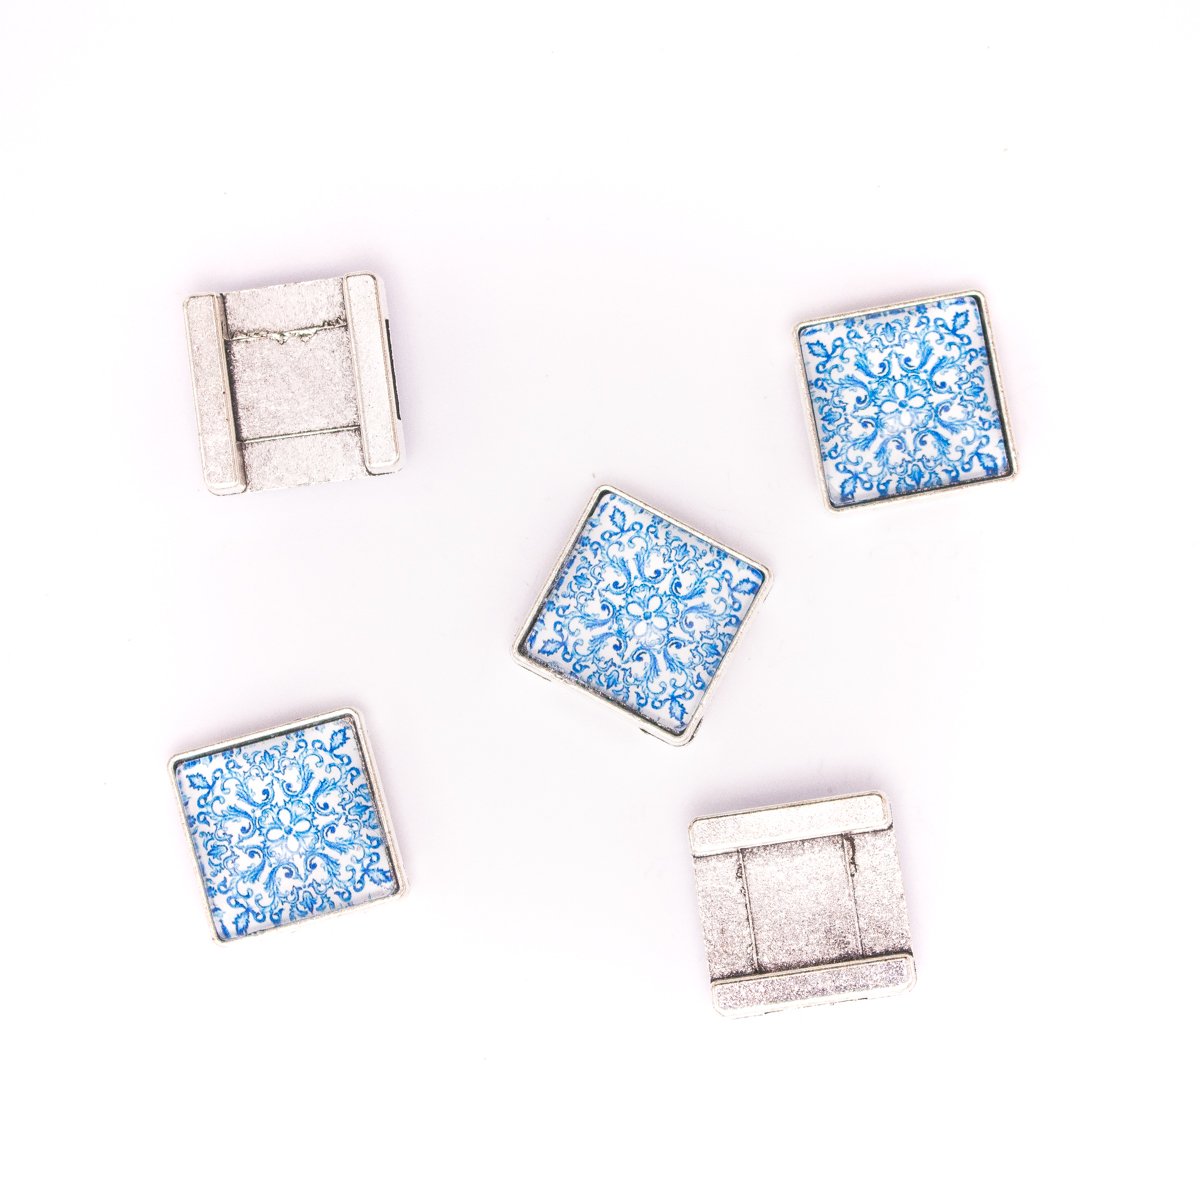 10units For 10mm flat cord slider with square Portuguese tiles for bracelet finding（22mm*22mm） D-1-10-227